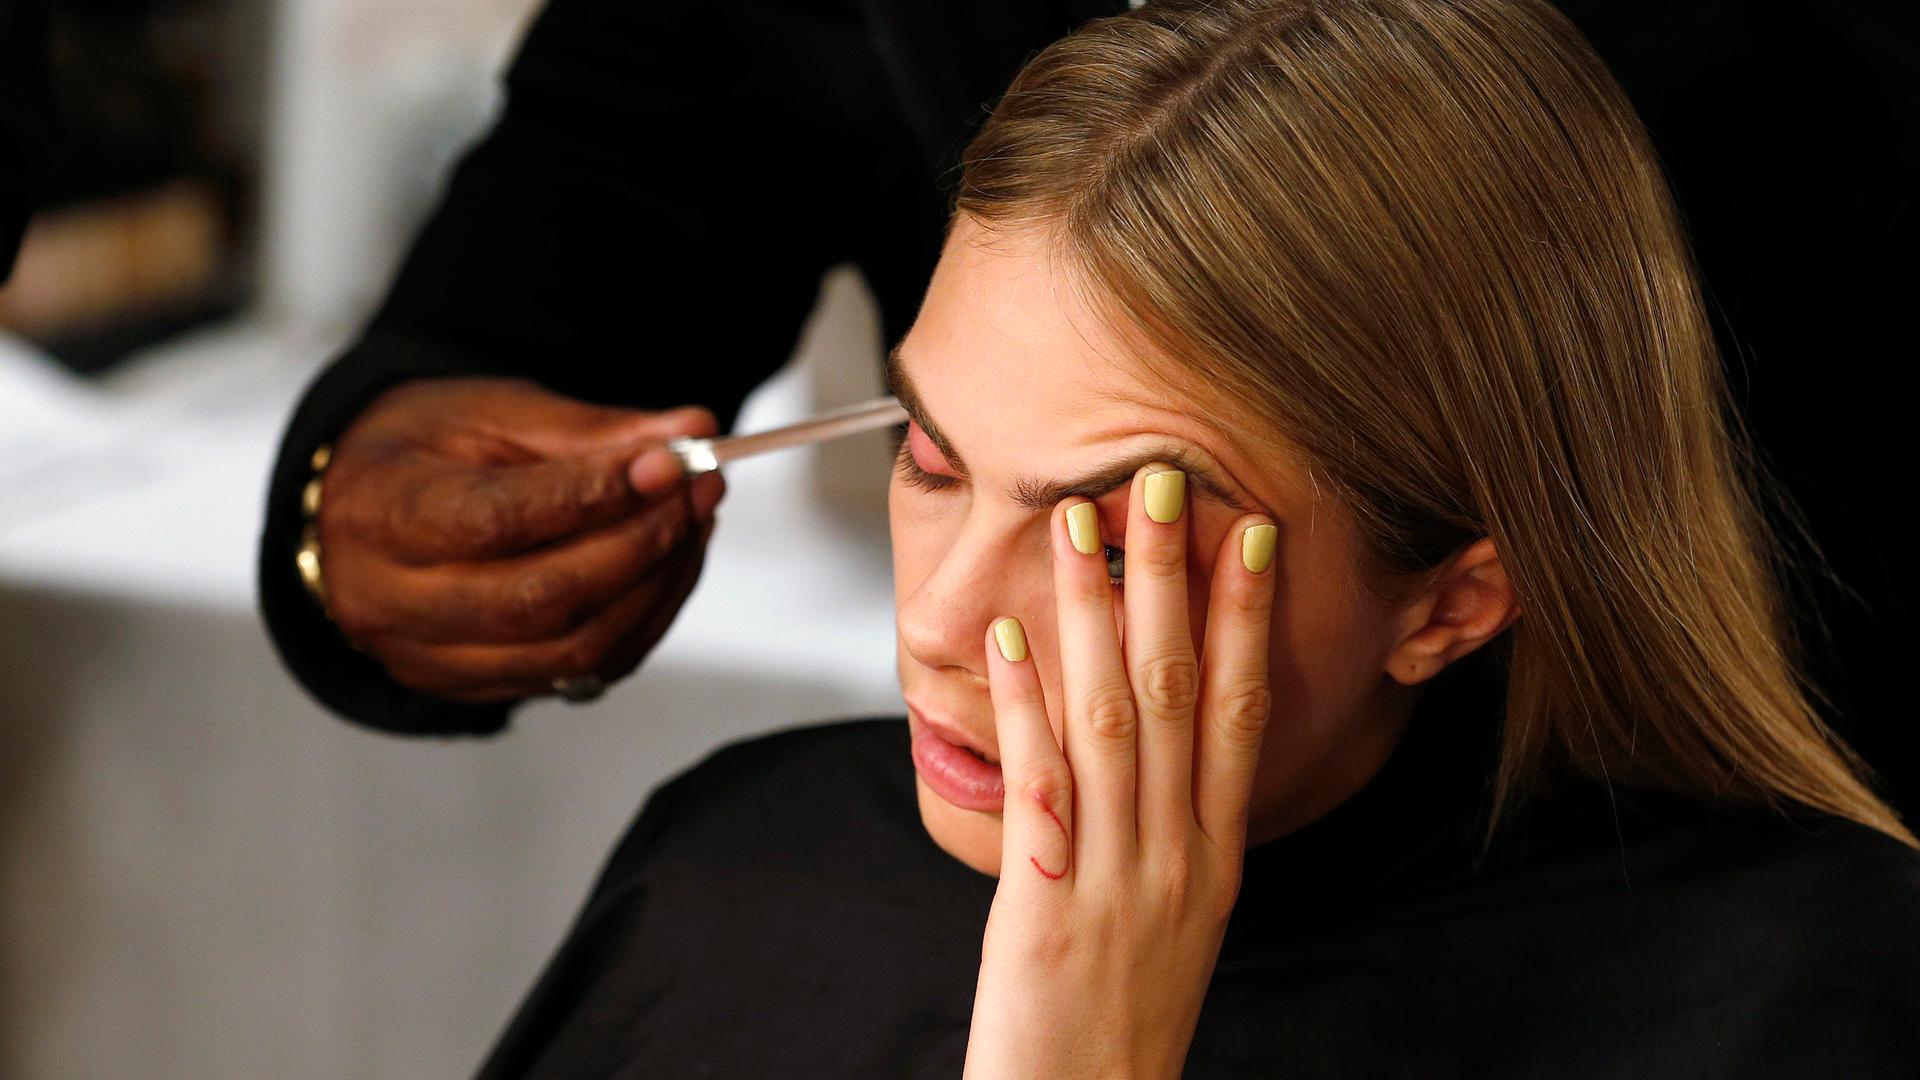 Model Cara Delevingne has her hair styled backstage during London Fashion Week.